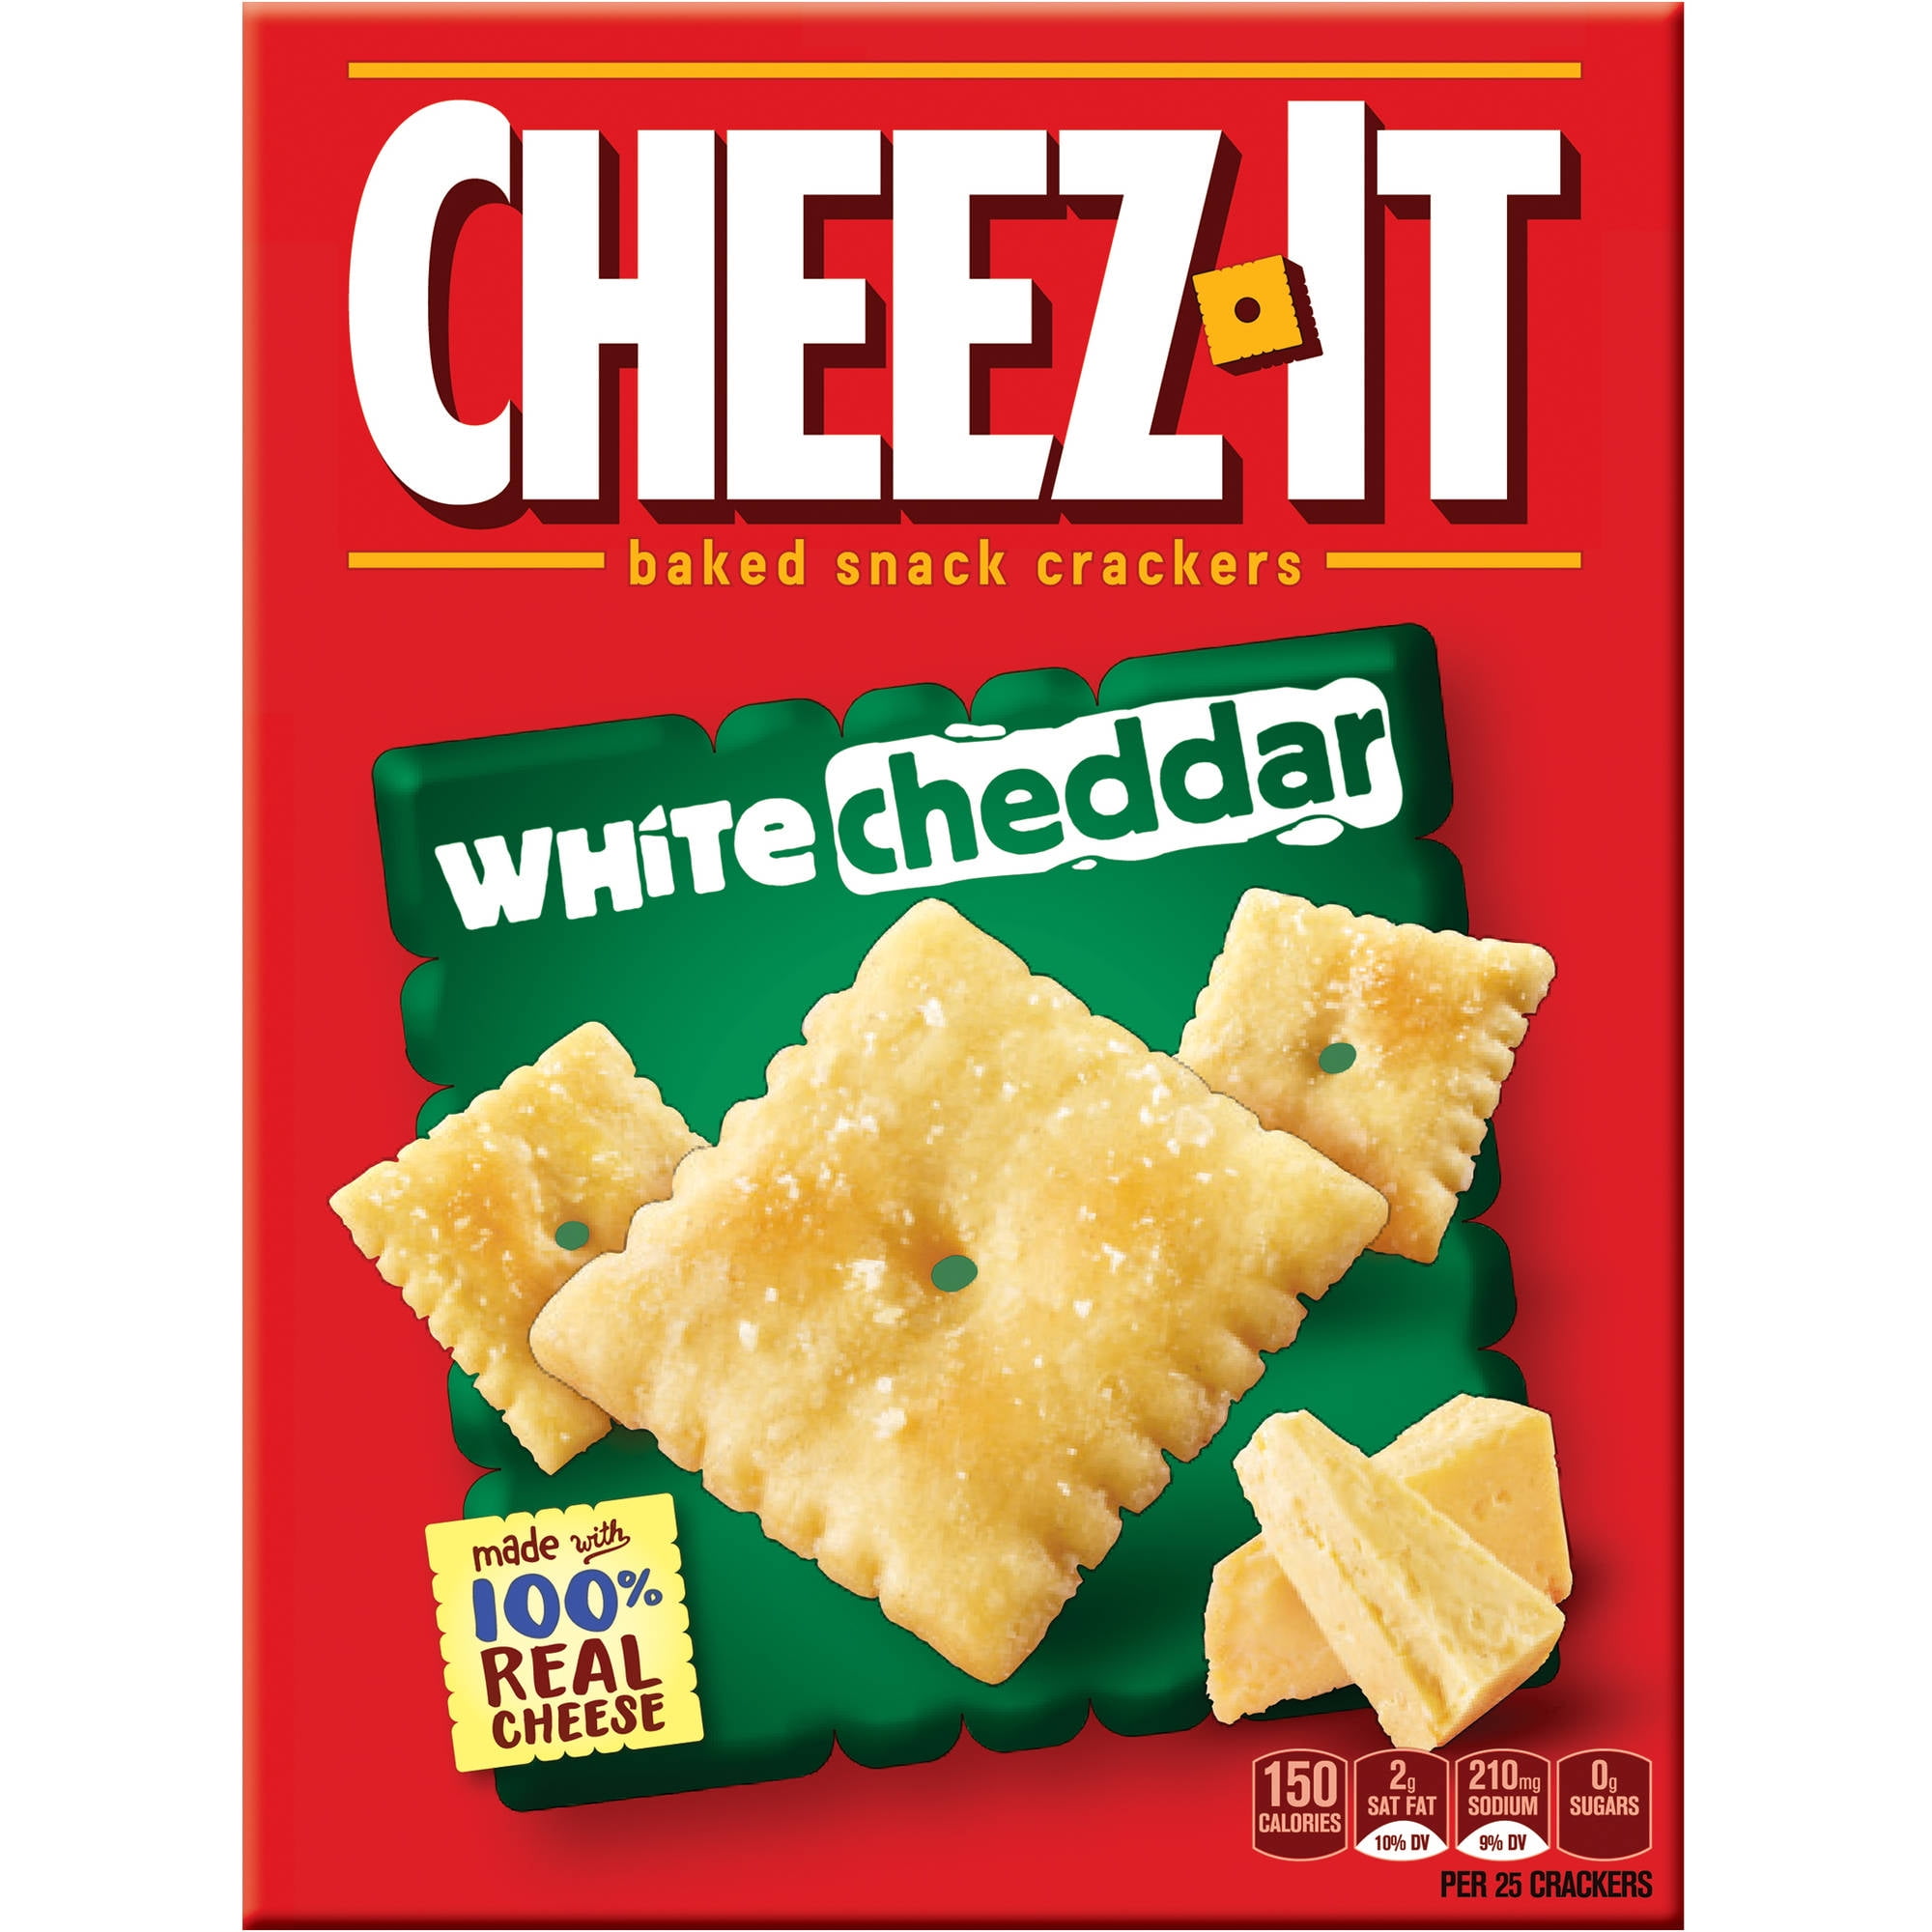 Cheez-It White Cheddar Baked Snack Crackers, 12.4 oz - Walmart.com